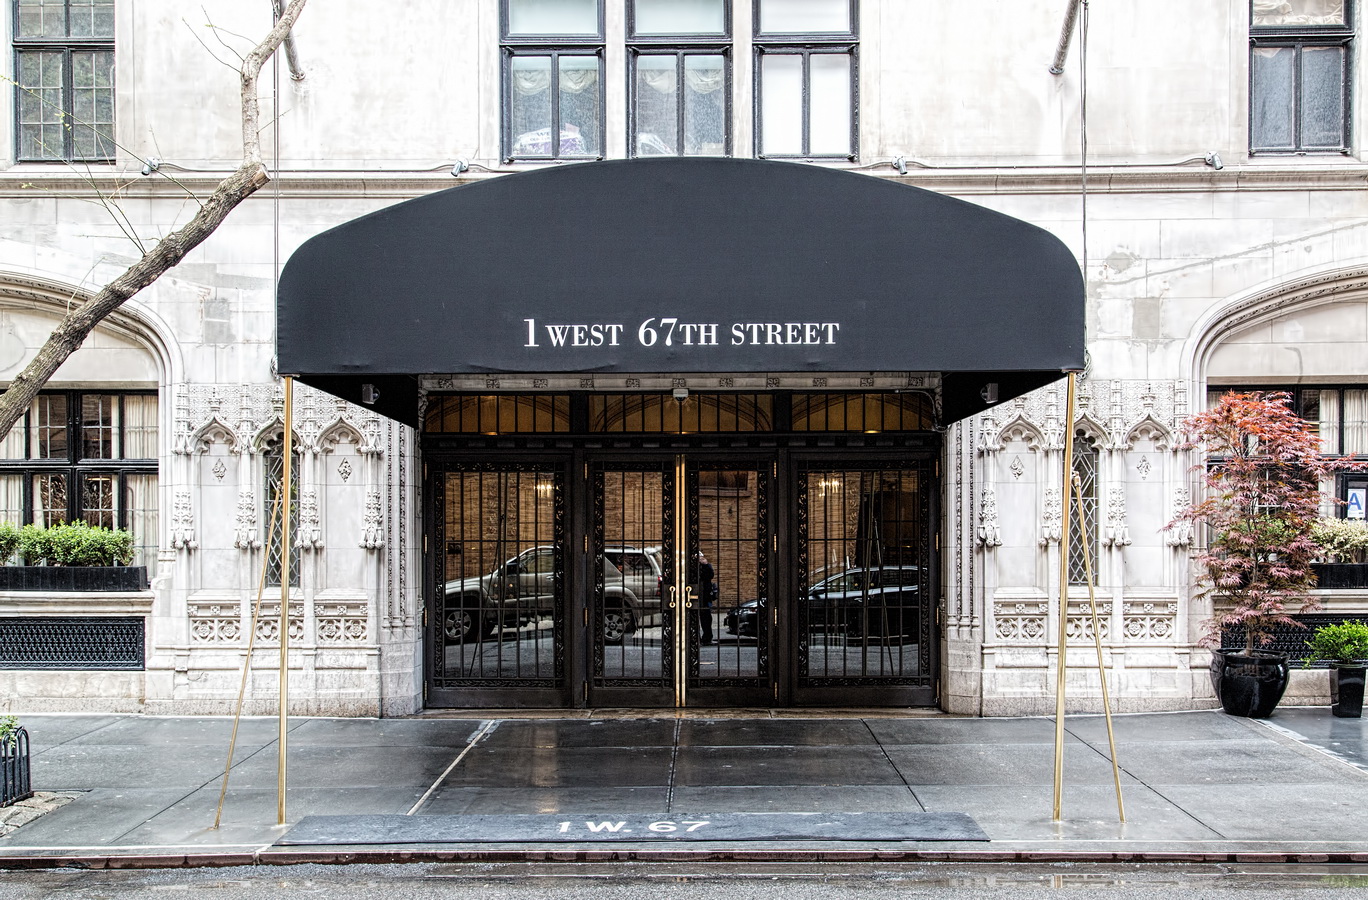 1 West 67th Street Archives » NewYorkitecture